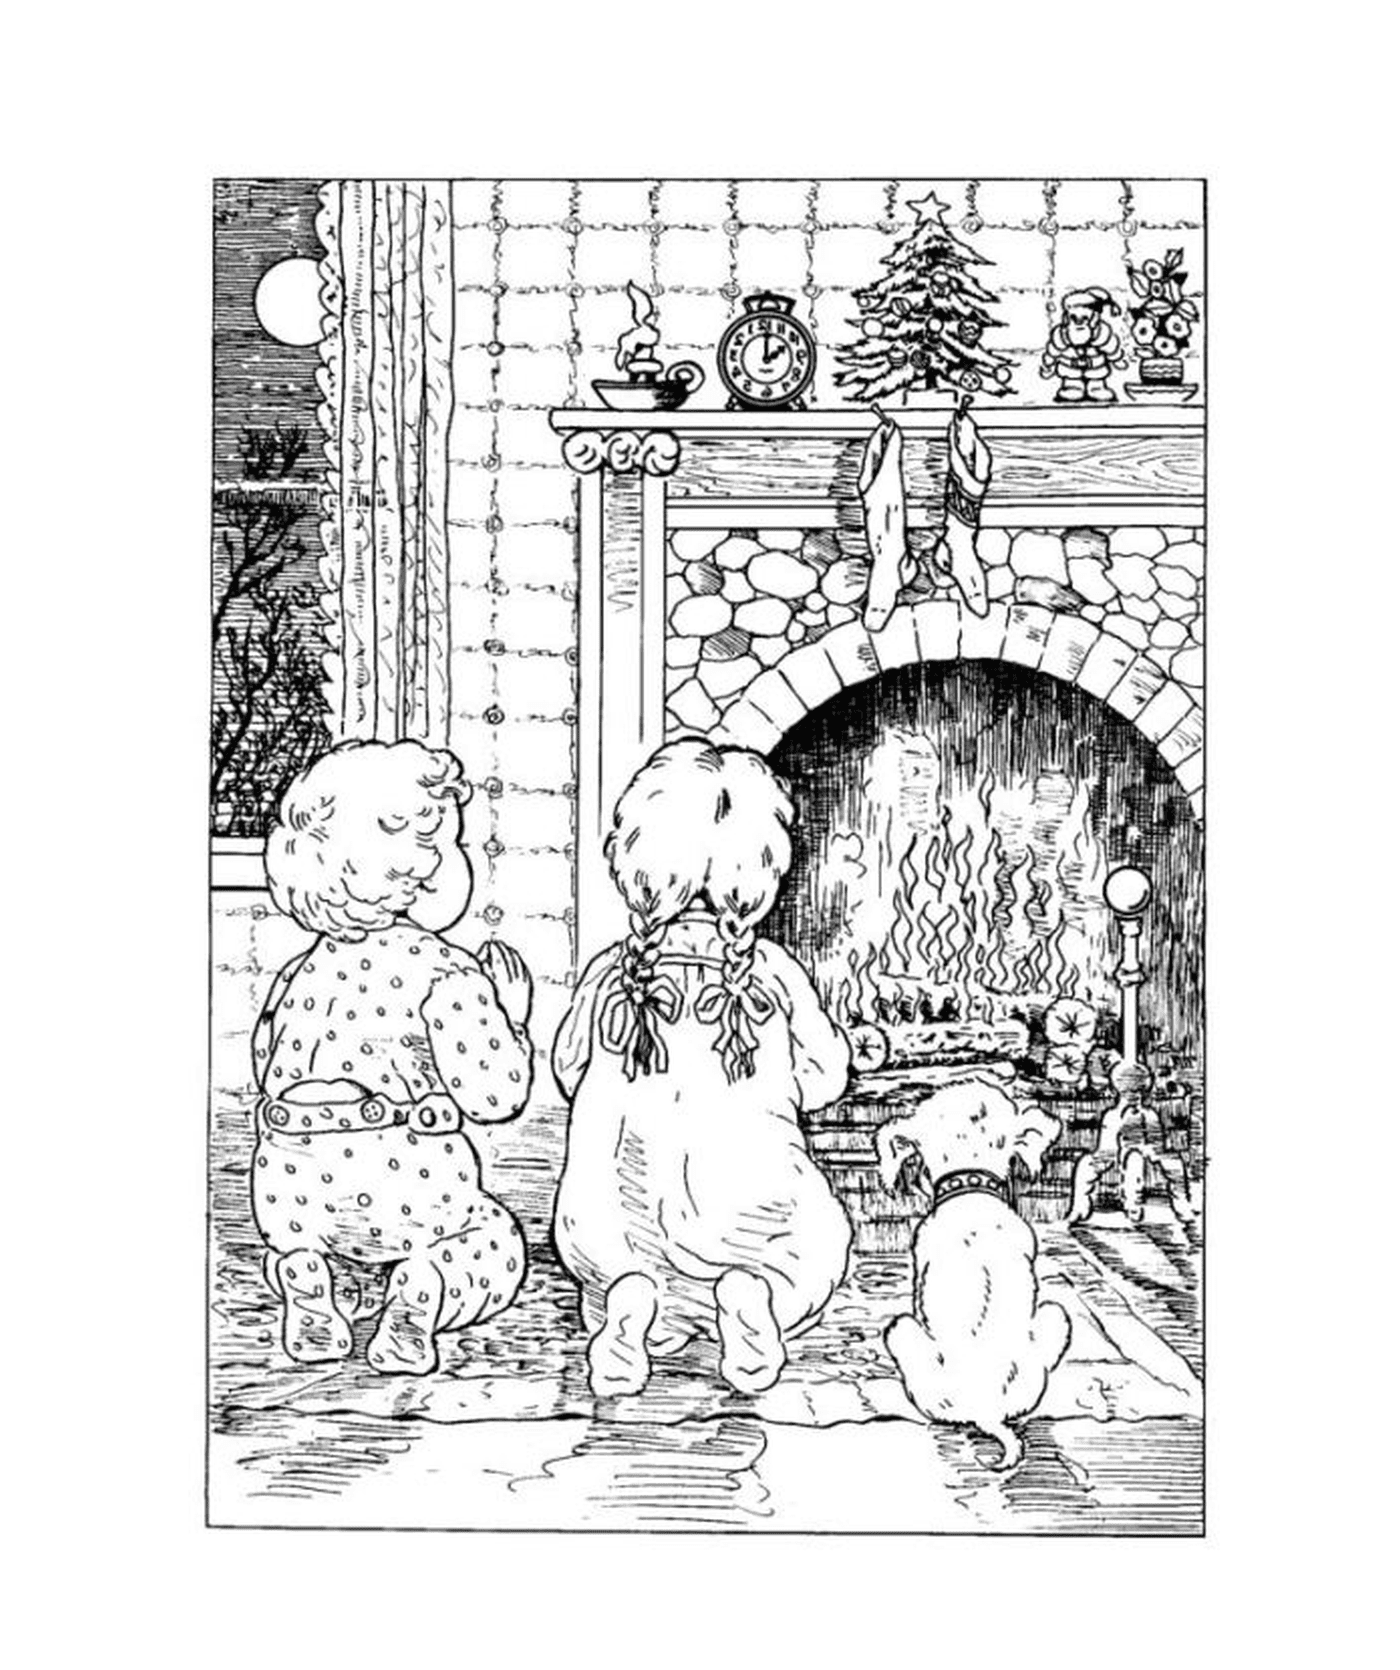  Fireplace with two dogs 